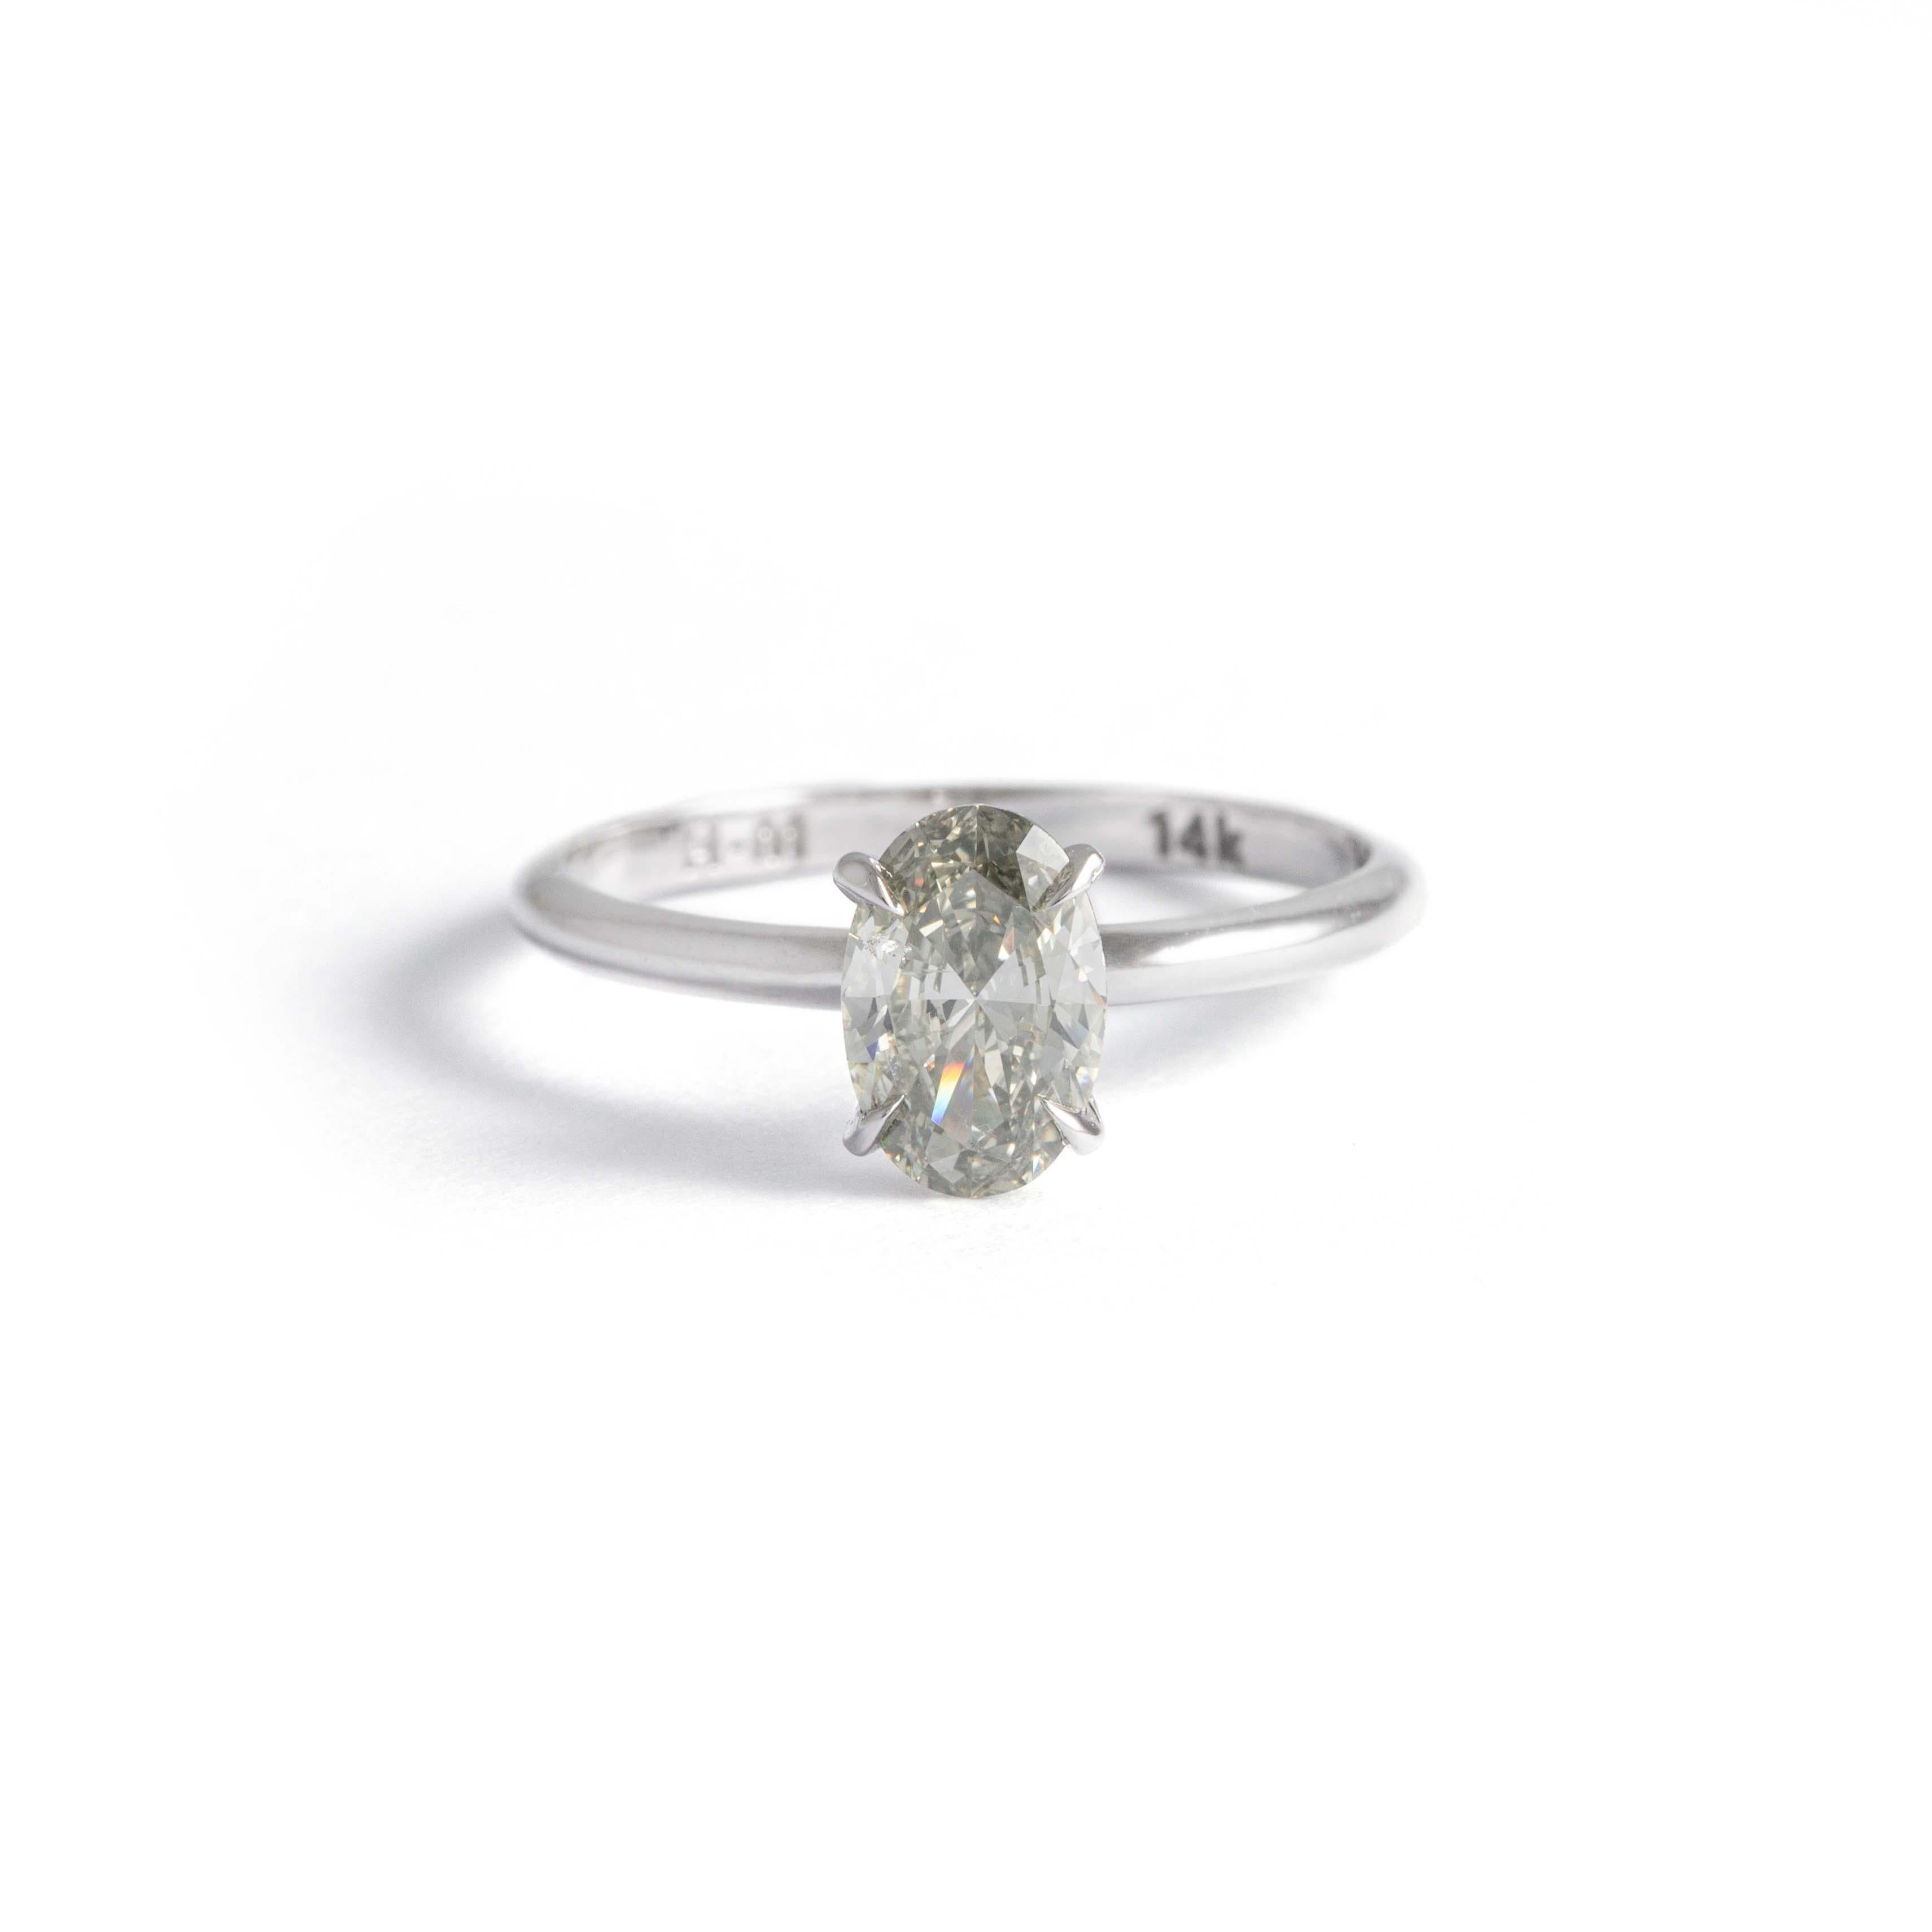 14K white gold solitaire ring centered by an oval-cut diamond weighing 1.10 carat. 
Light Gray color, Vs1 clarity, based on Aig certificate J3210853830.
Gross weight: 1.70 grams.